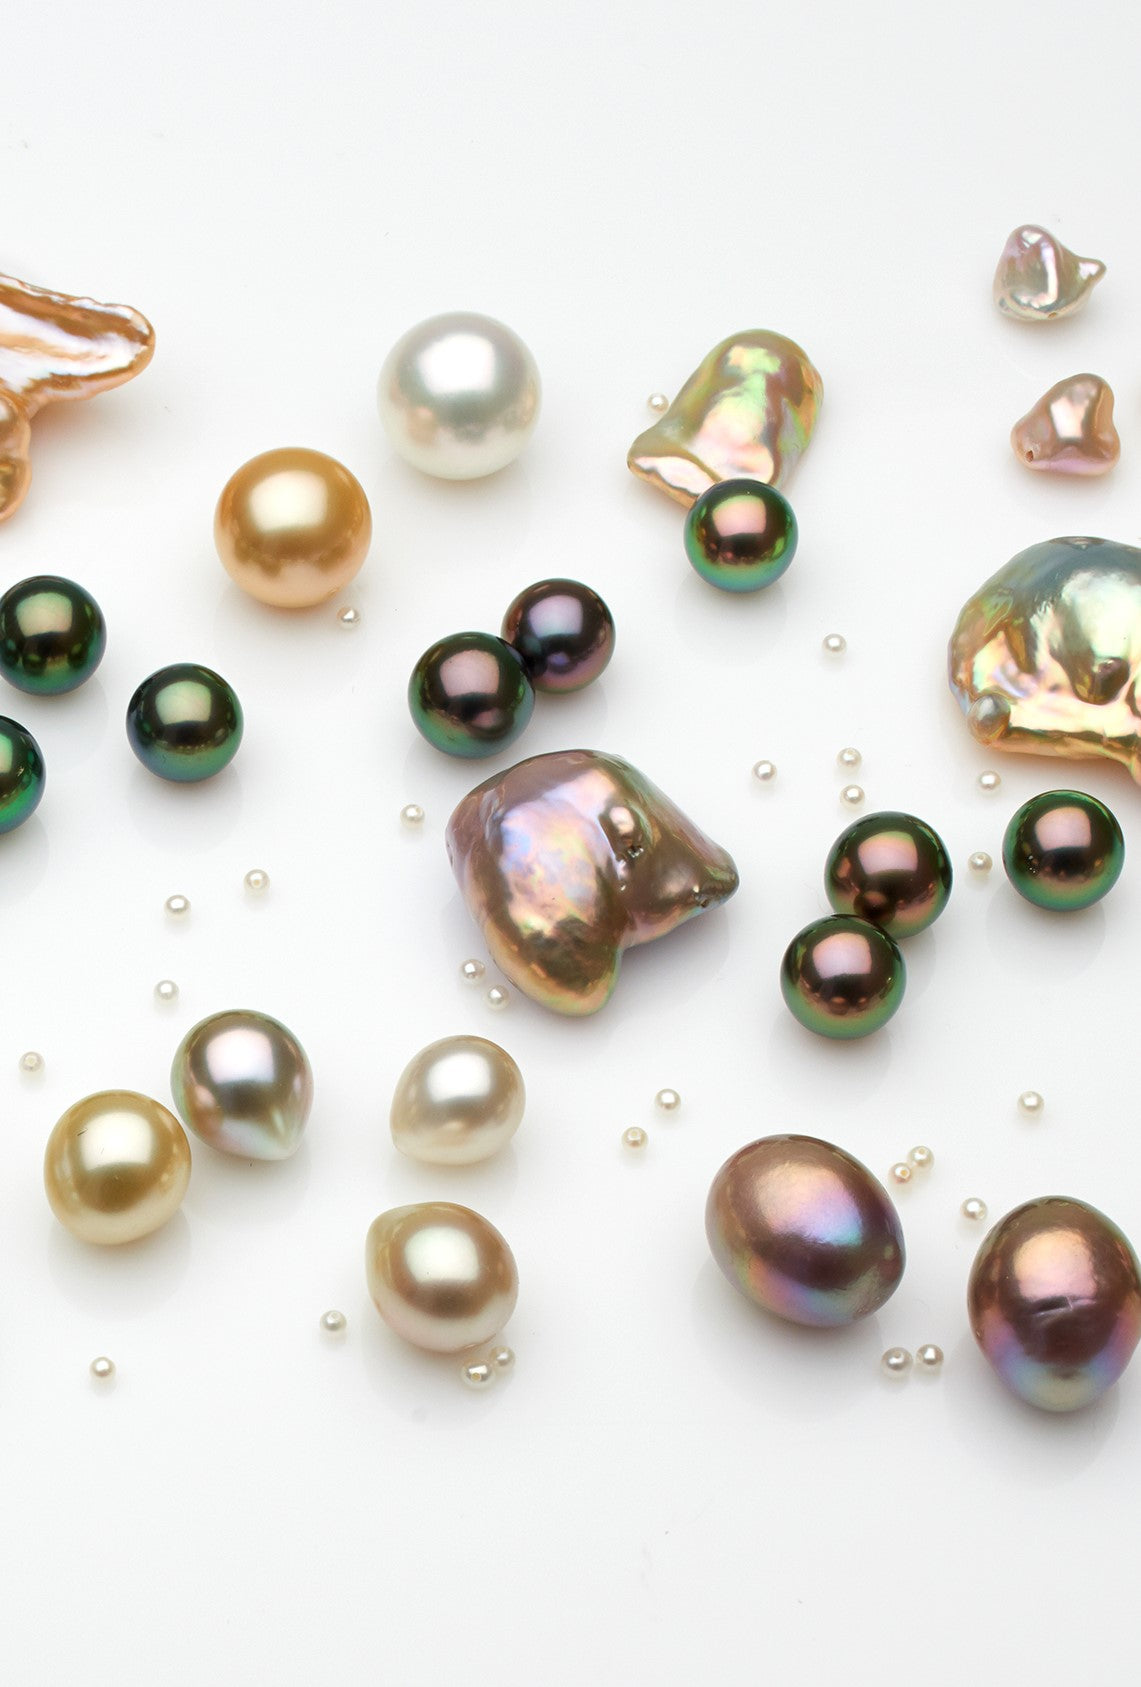 Different types of pearls, Tahitians, South Sea, akoya and some rare freshwater